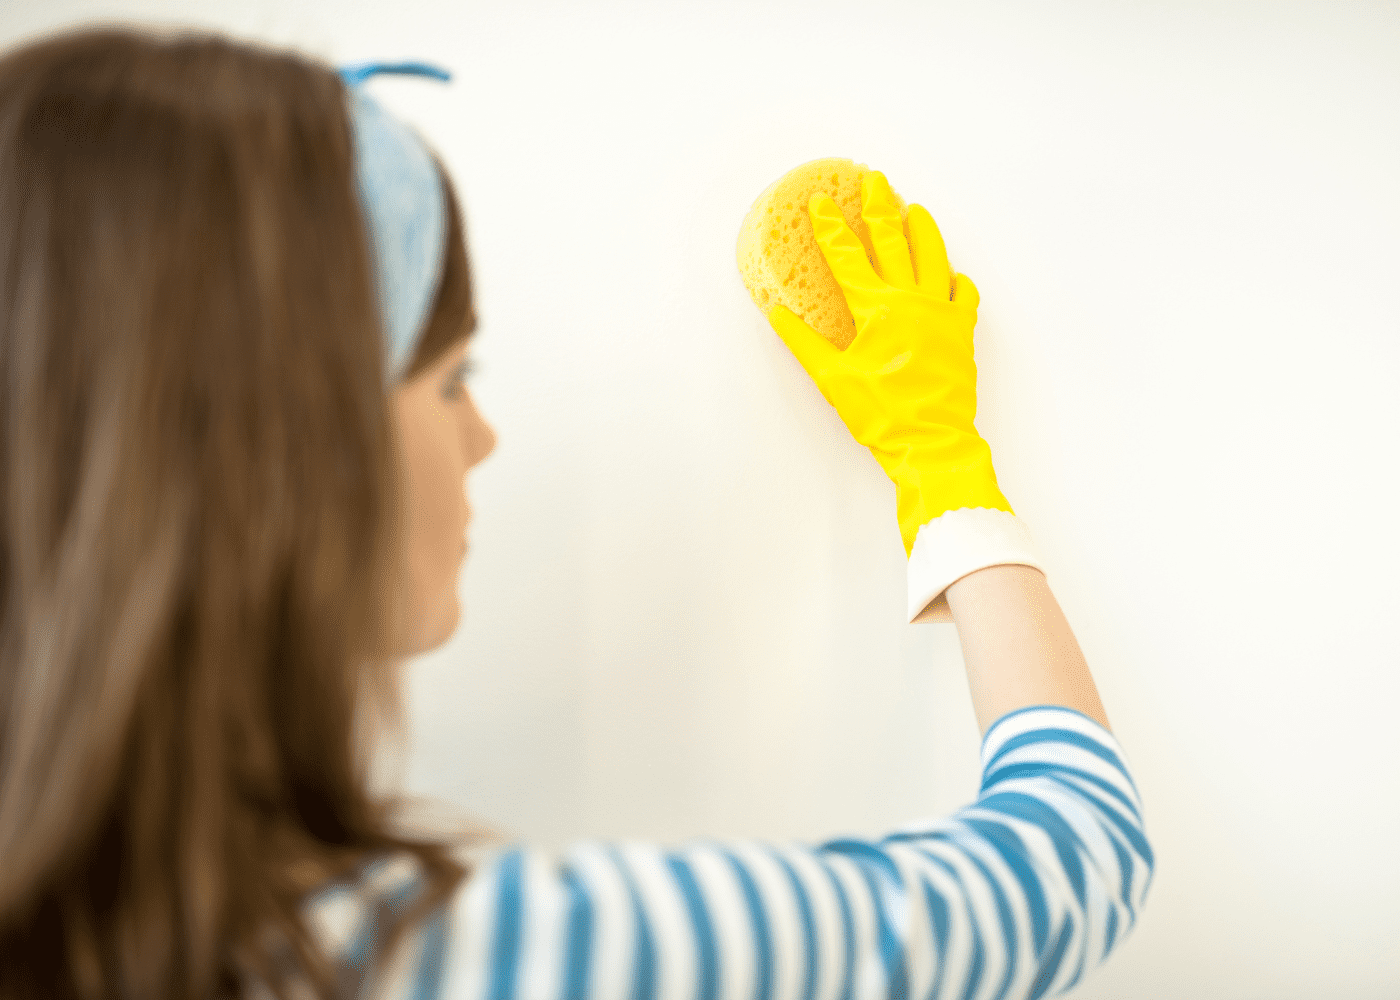 A woman cleaning a white wall with a sponge and yellow glove on in post how to clean white walls.